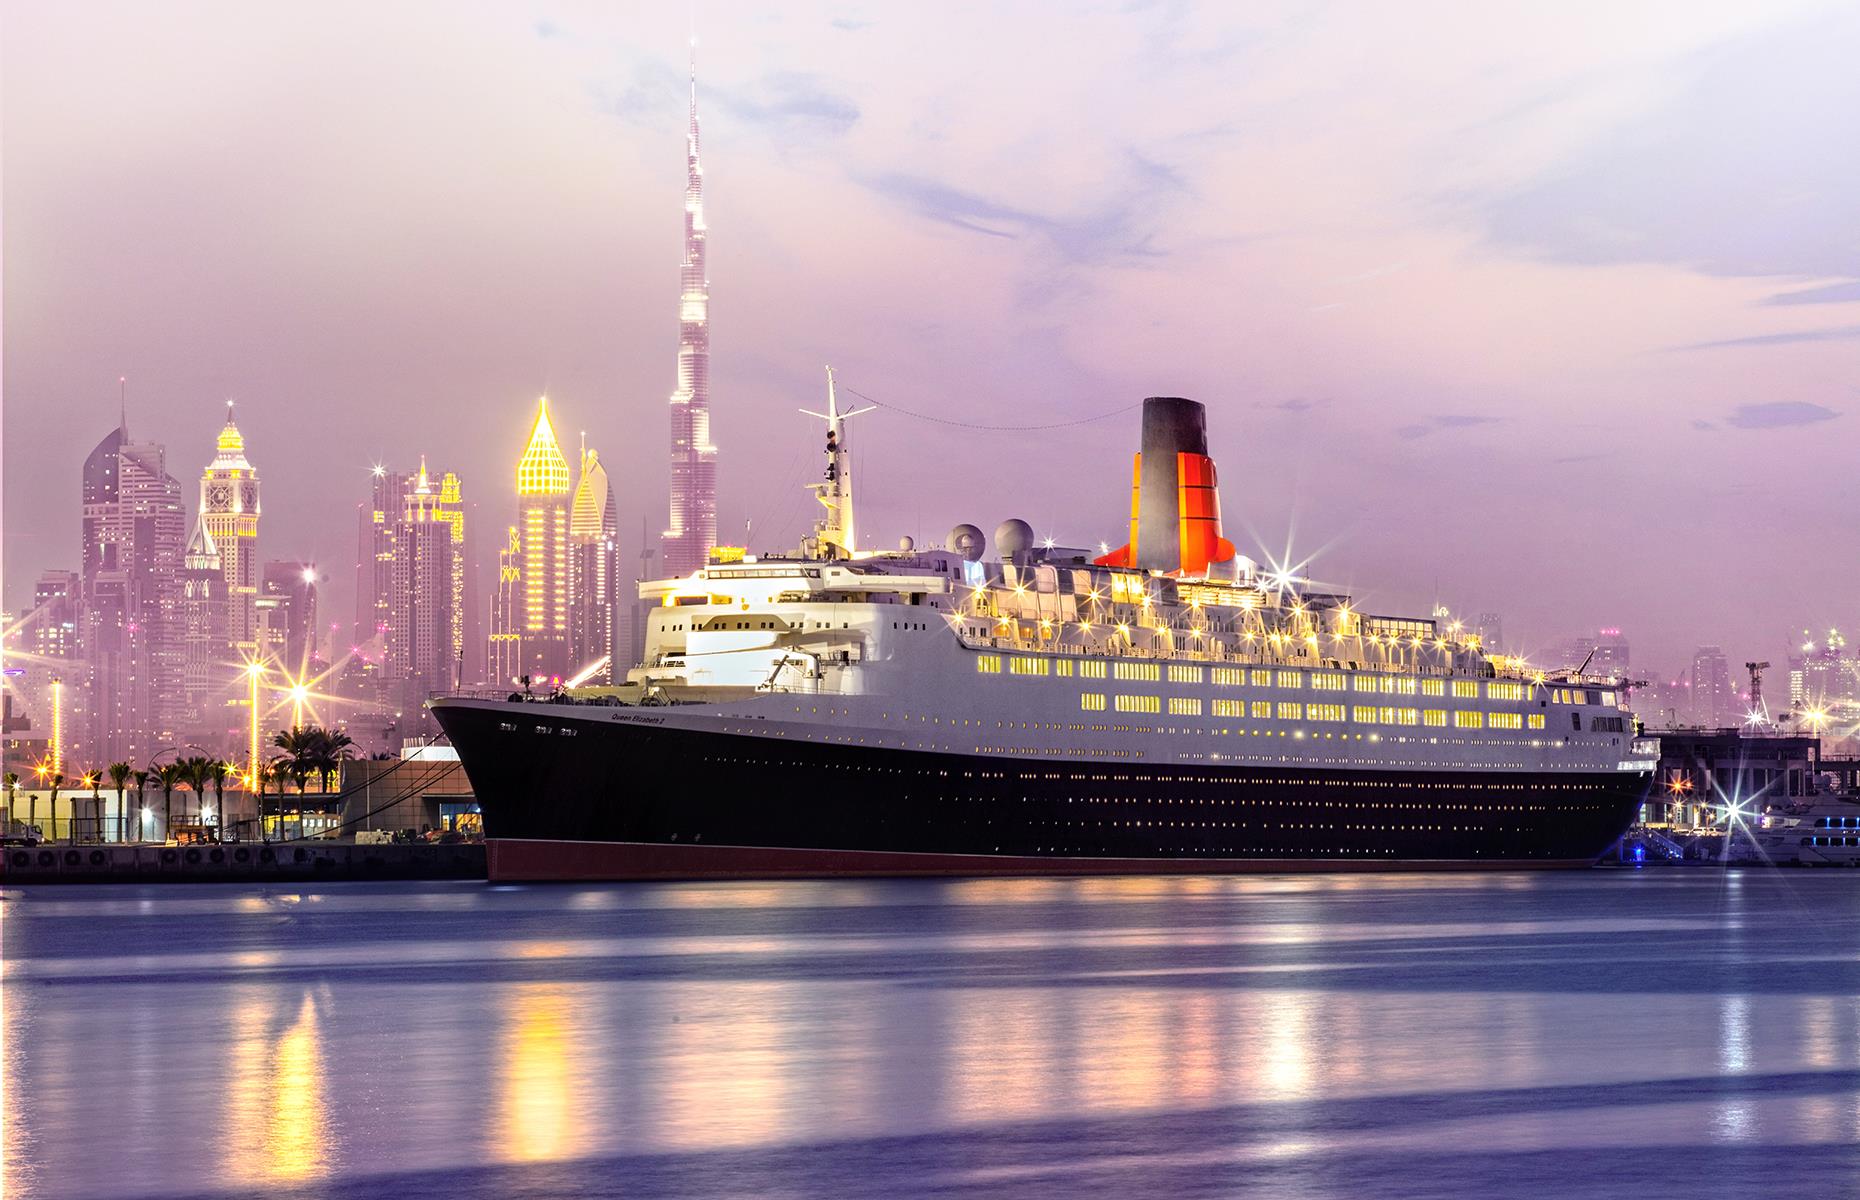 <p>Once one of the most luxurious and legendary cruise liners of the seas, <a href="https://www.qe2.com/en/">the QE2</a> is now permanently docked at Dubai's Mina Rashid cruise terminal and finally opened in 2018, after a 10-year restoration process, as a luxury hotel. It's filled with 224 luxurious rooms, including two Royal suites.</p>